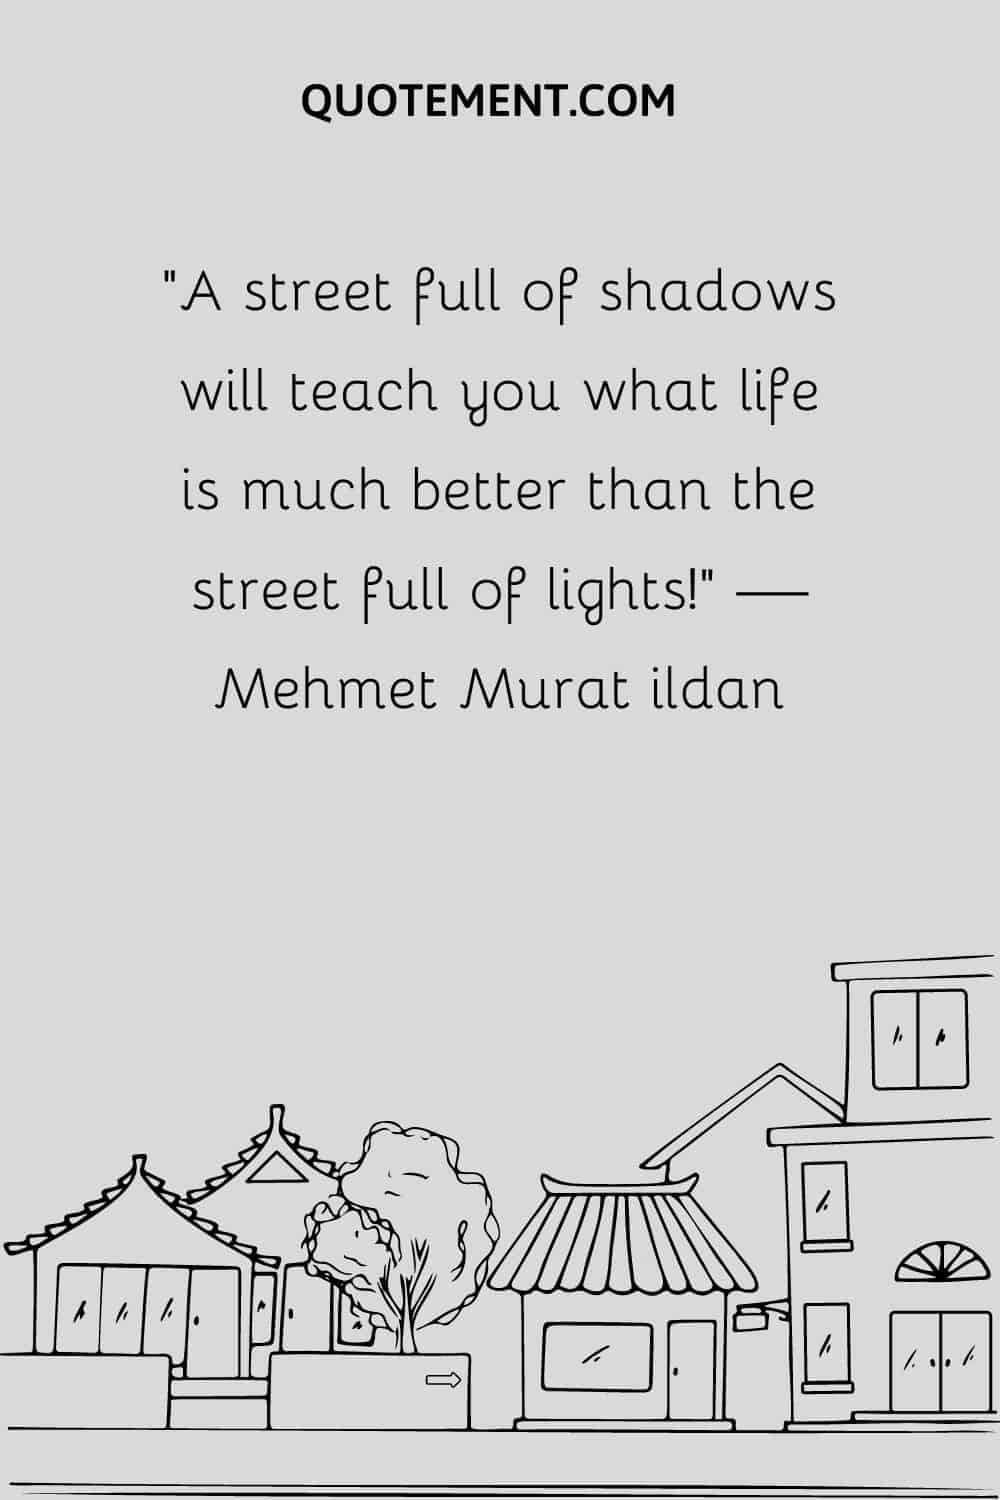 A street full of shadows will teach you what life is much better than the street full of lights